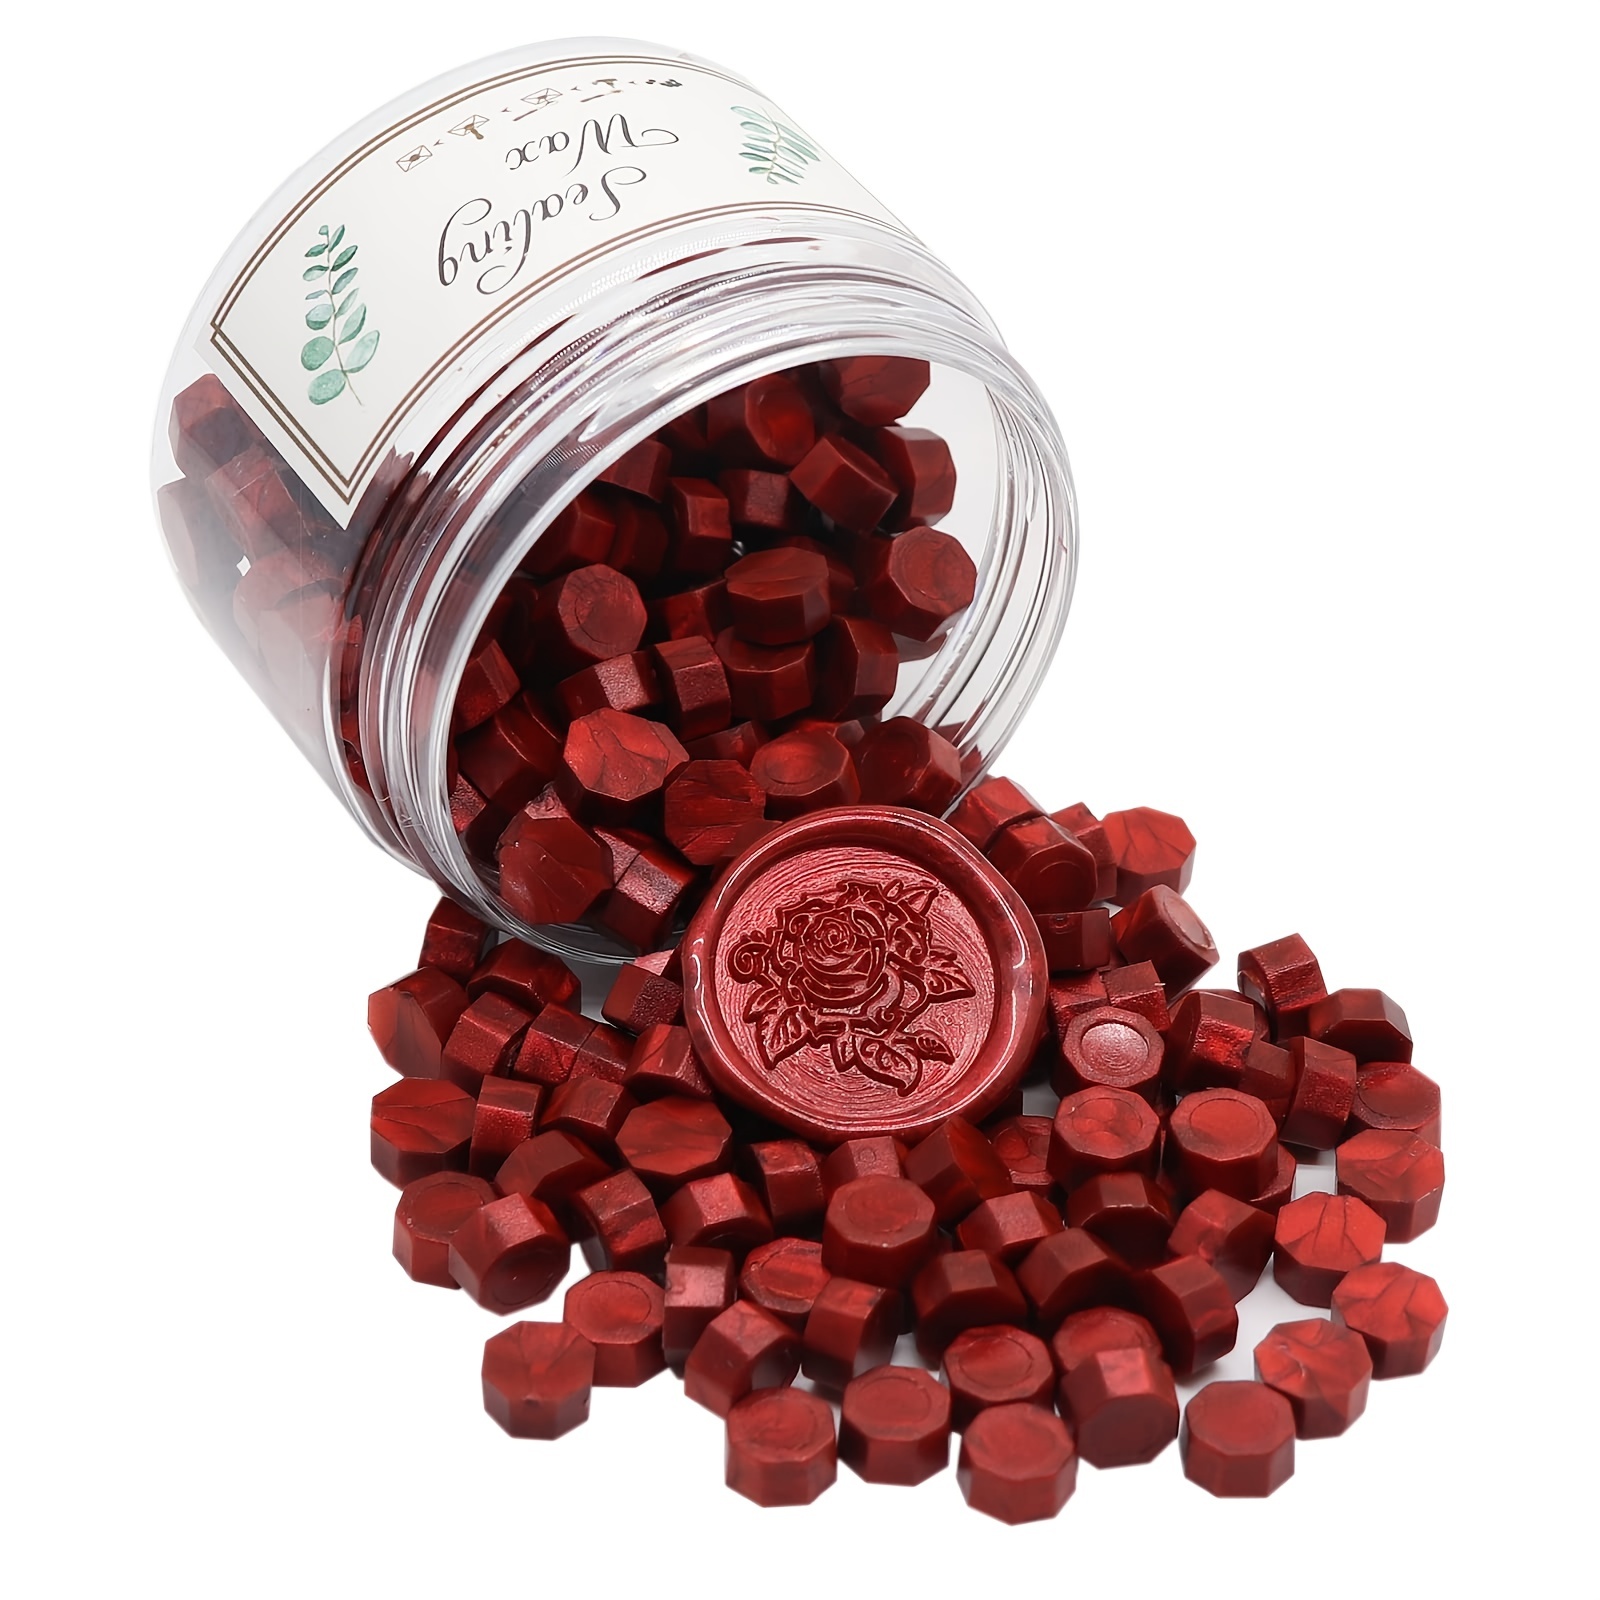 Buy 250 PCS Wax Seal Stamp Kit, WEWINK PLUS Wine Red Sealing Wax Beads with  Deer Wax Stamp, Wax Seal Warmer, Wax Seal Spoon, Tea Candles, Metallic Pen  for Stamp Seals, Gifts